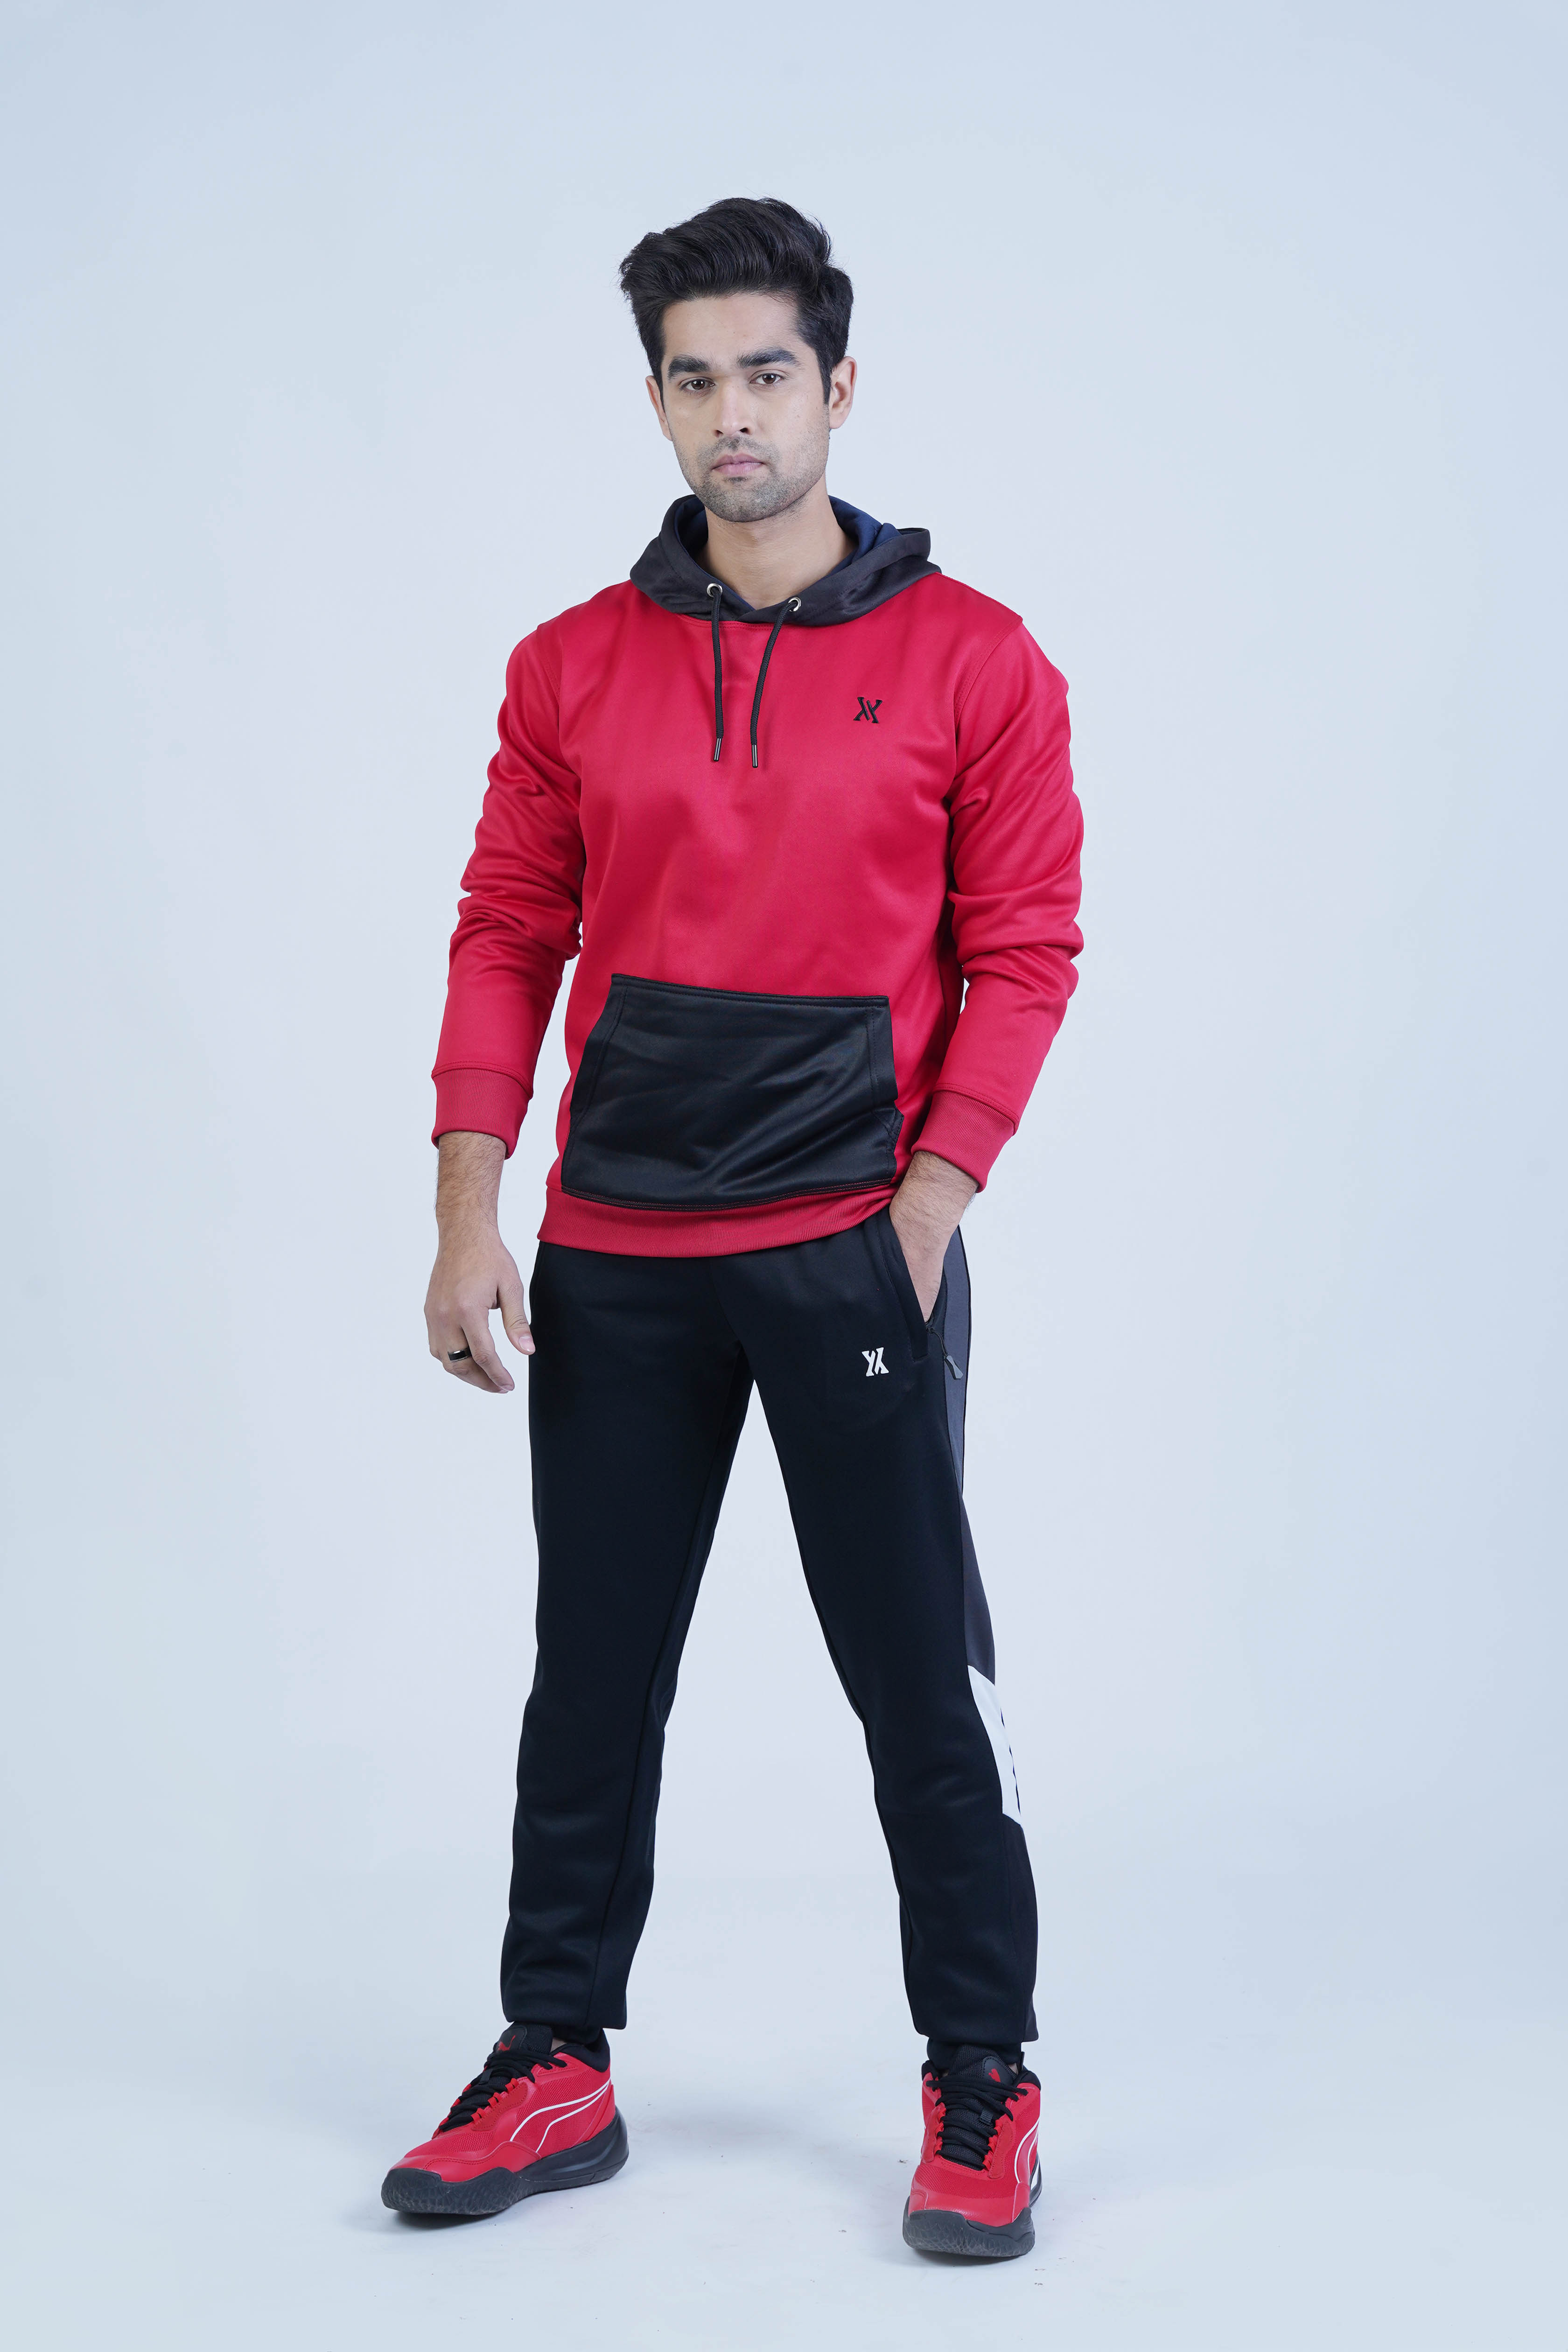 Relaxed Fit Red Hoodie - The Xea Men's Clothing Collection